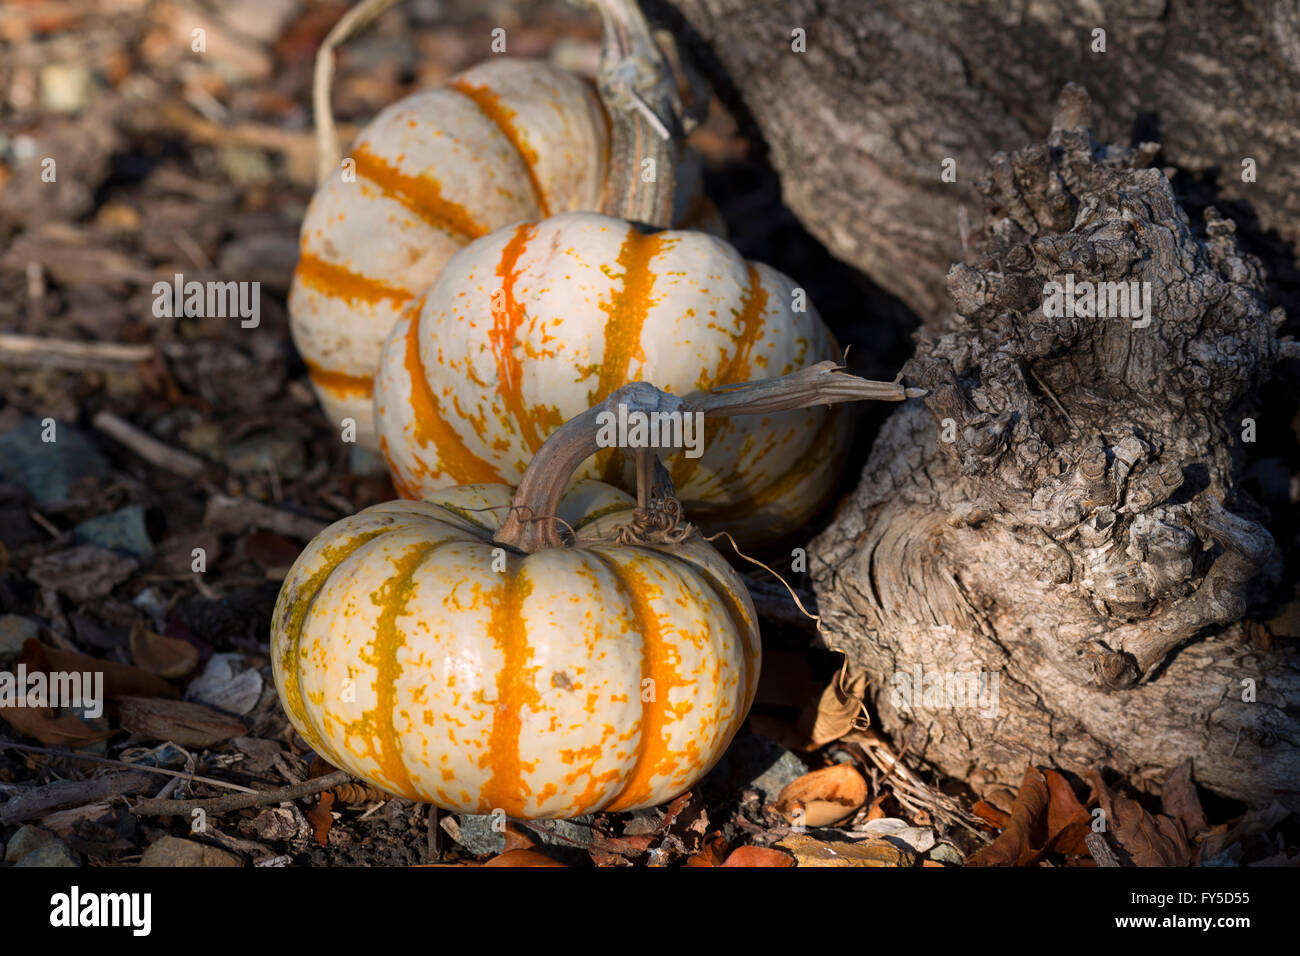 ornamental pumpkins at Halloween time, set against the root of a tree Stock Photo